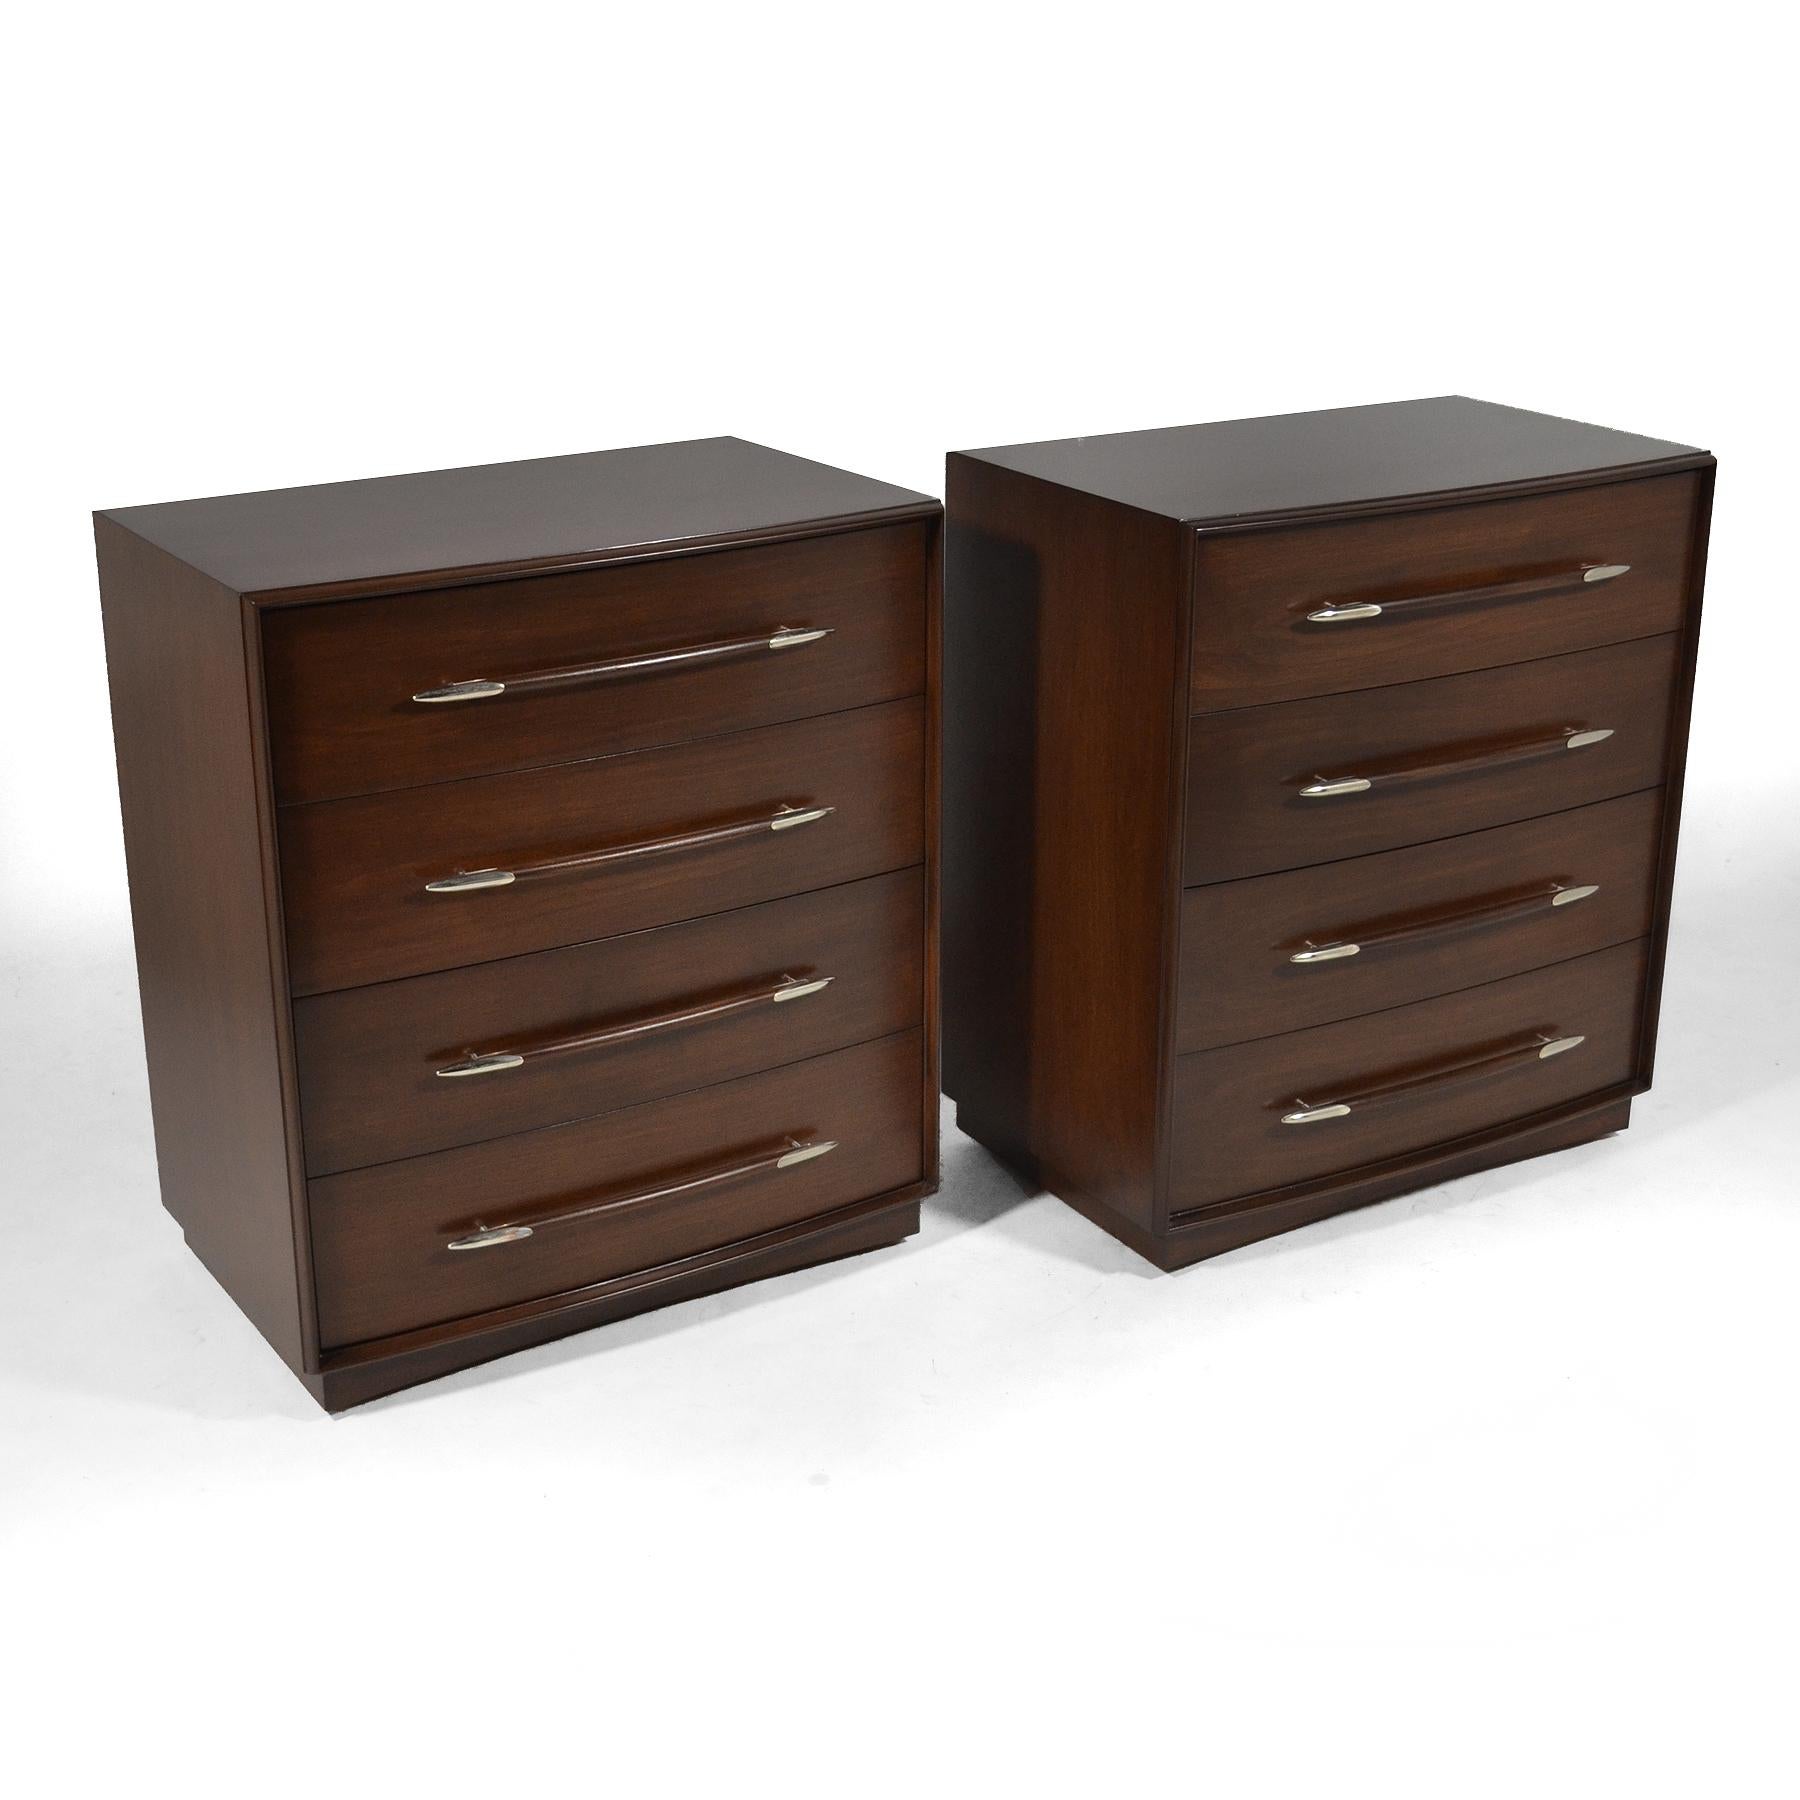 These stunning dressers by T.H. Robsjohn-Gibbings for Widdicomb are impeccably designed and expertly crafted. The walnut cases have been restored with a dark, rich finish and the elegant spear-shaped pulls polished to a beautiful luster.

        